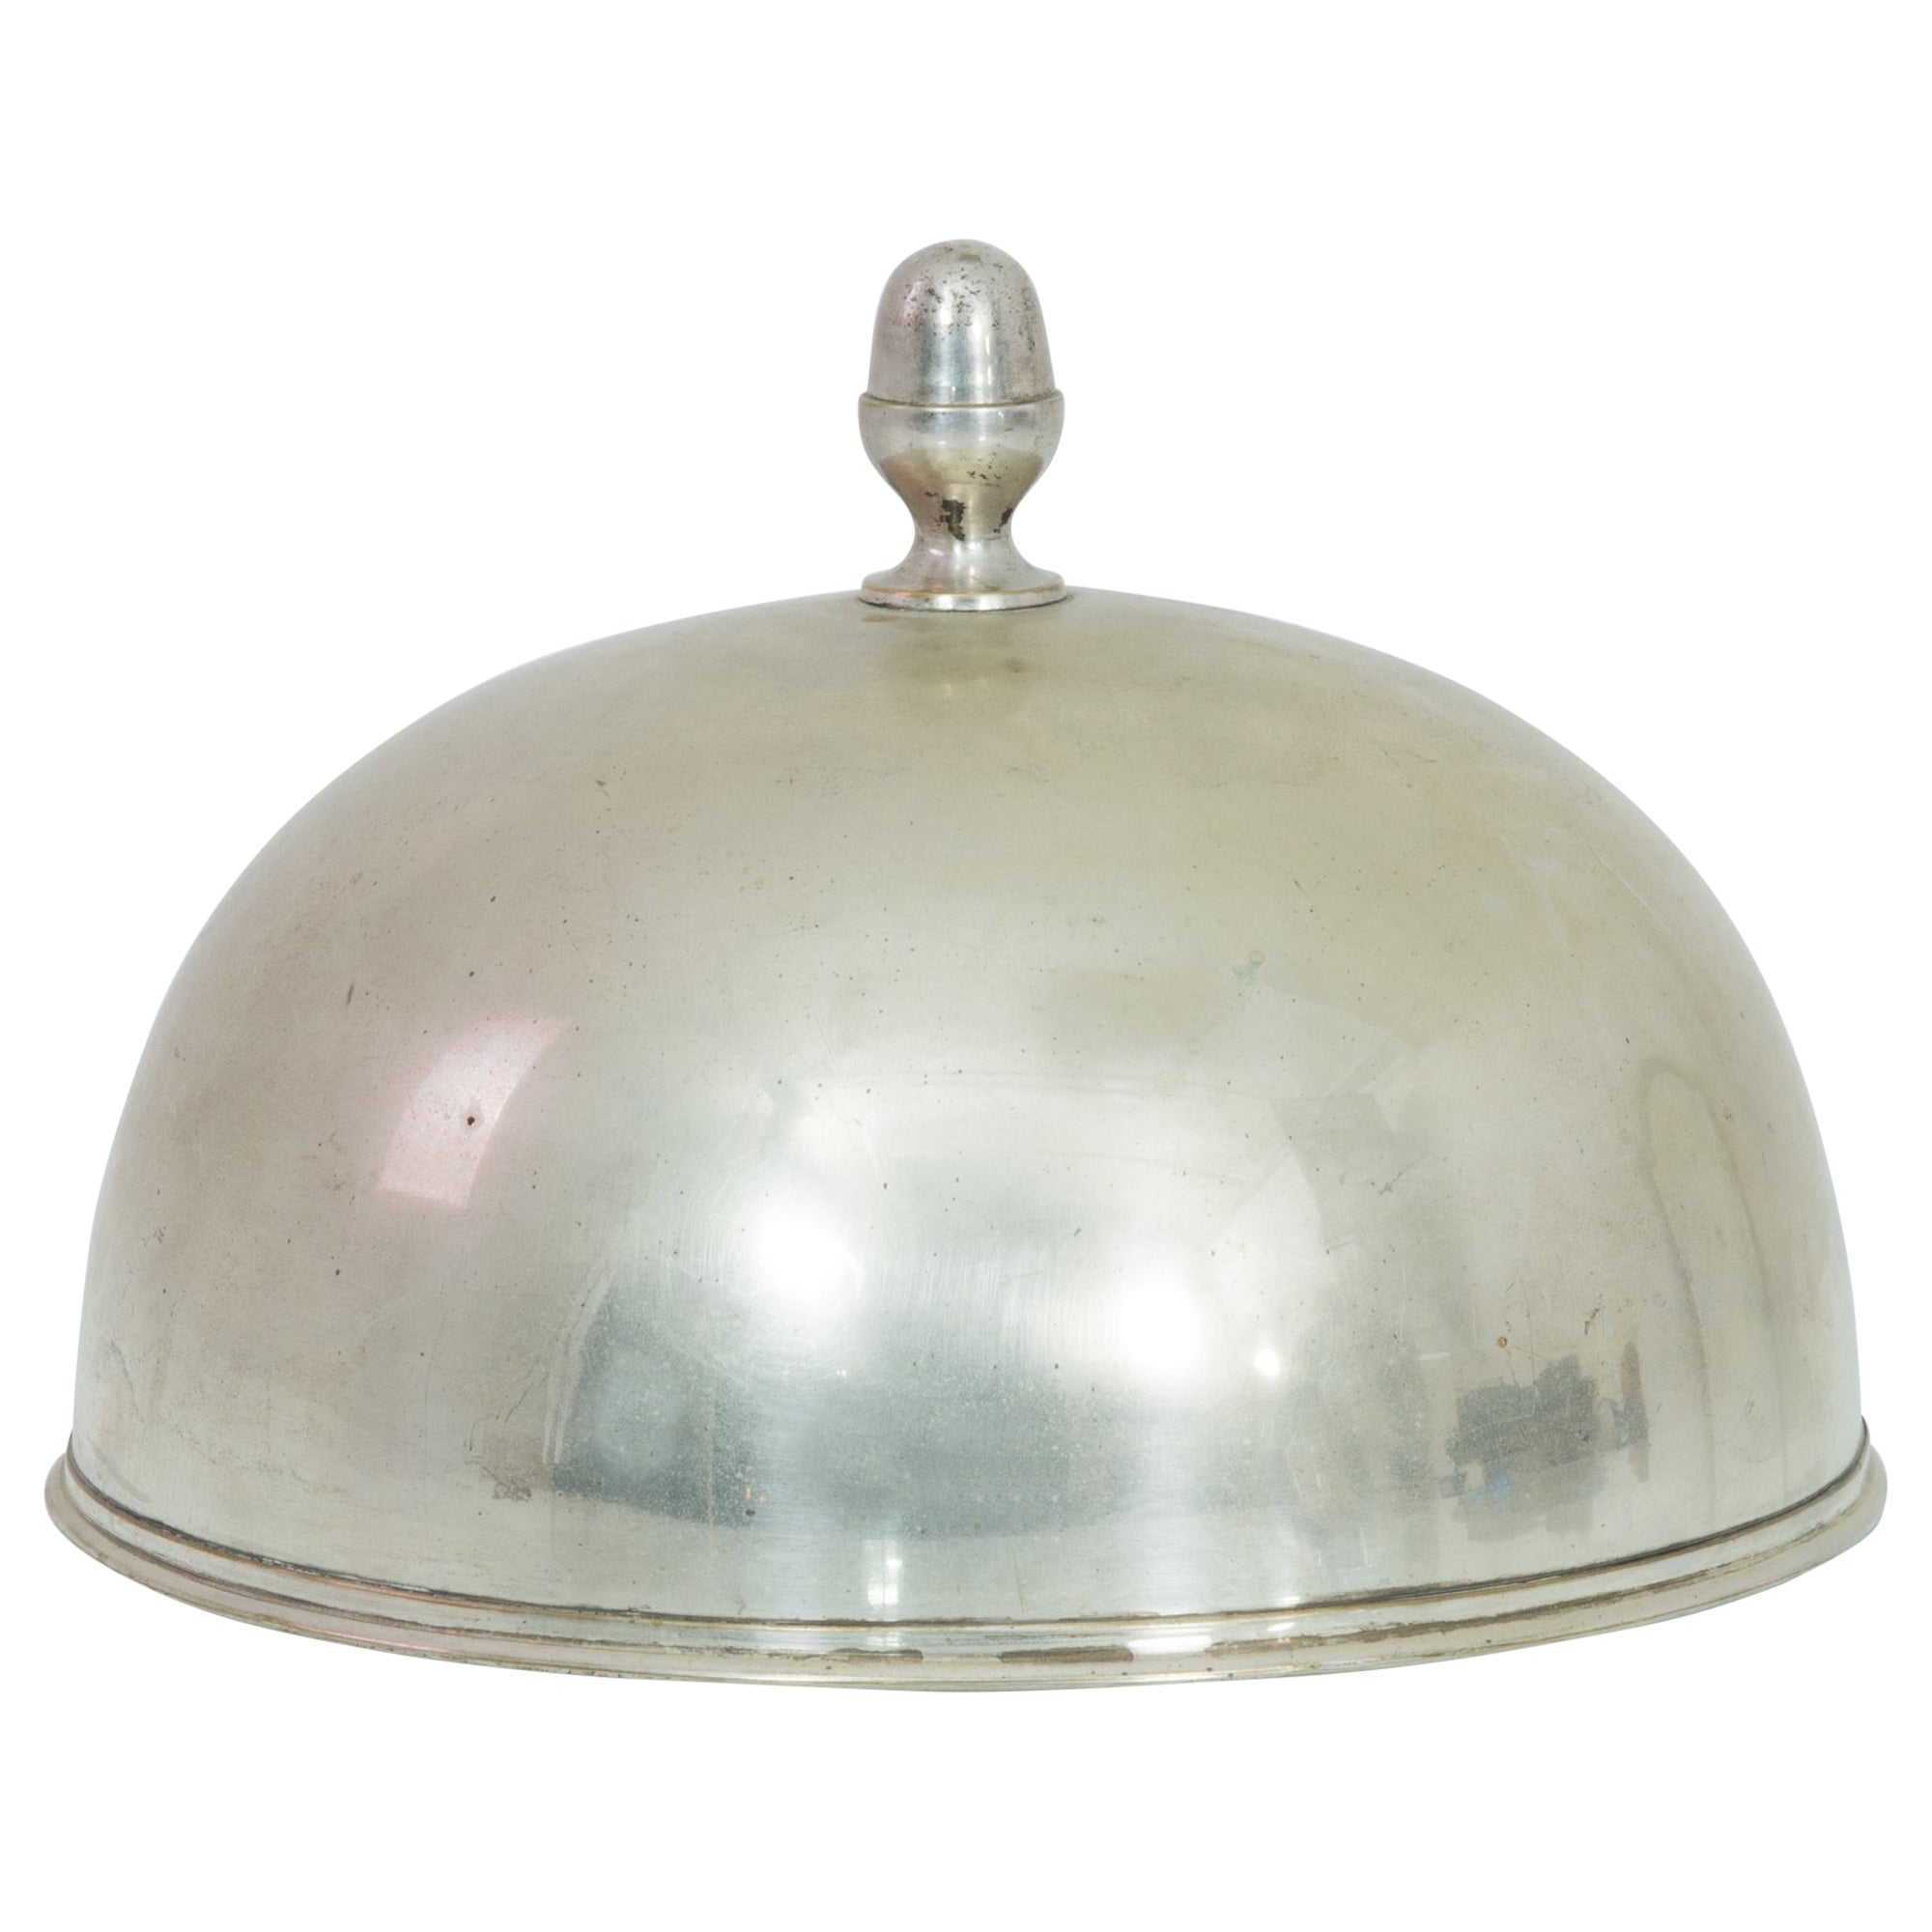 1940s European Silver-Plated Lid